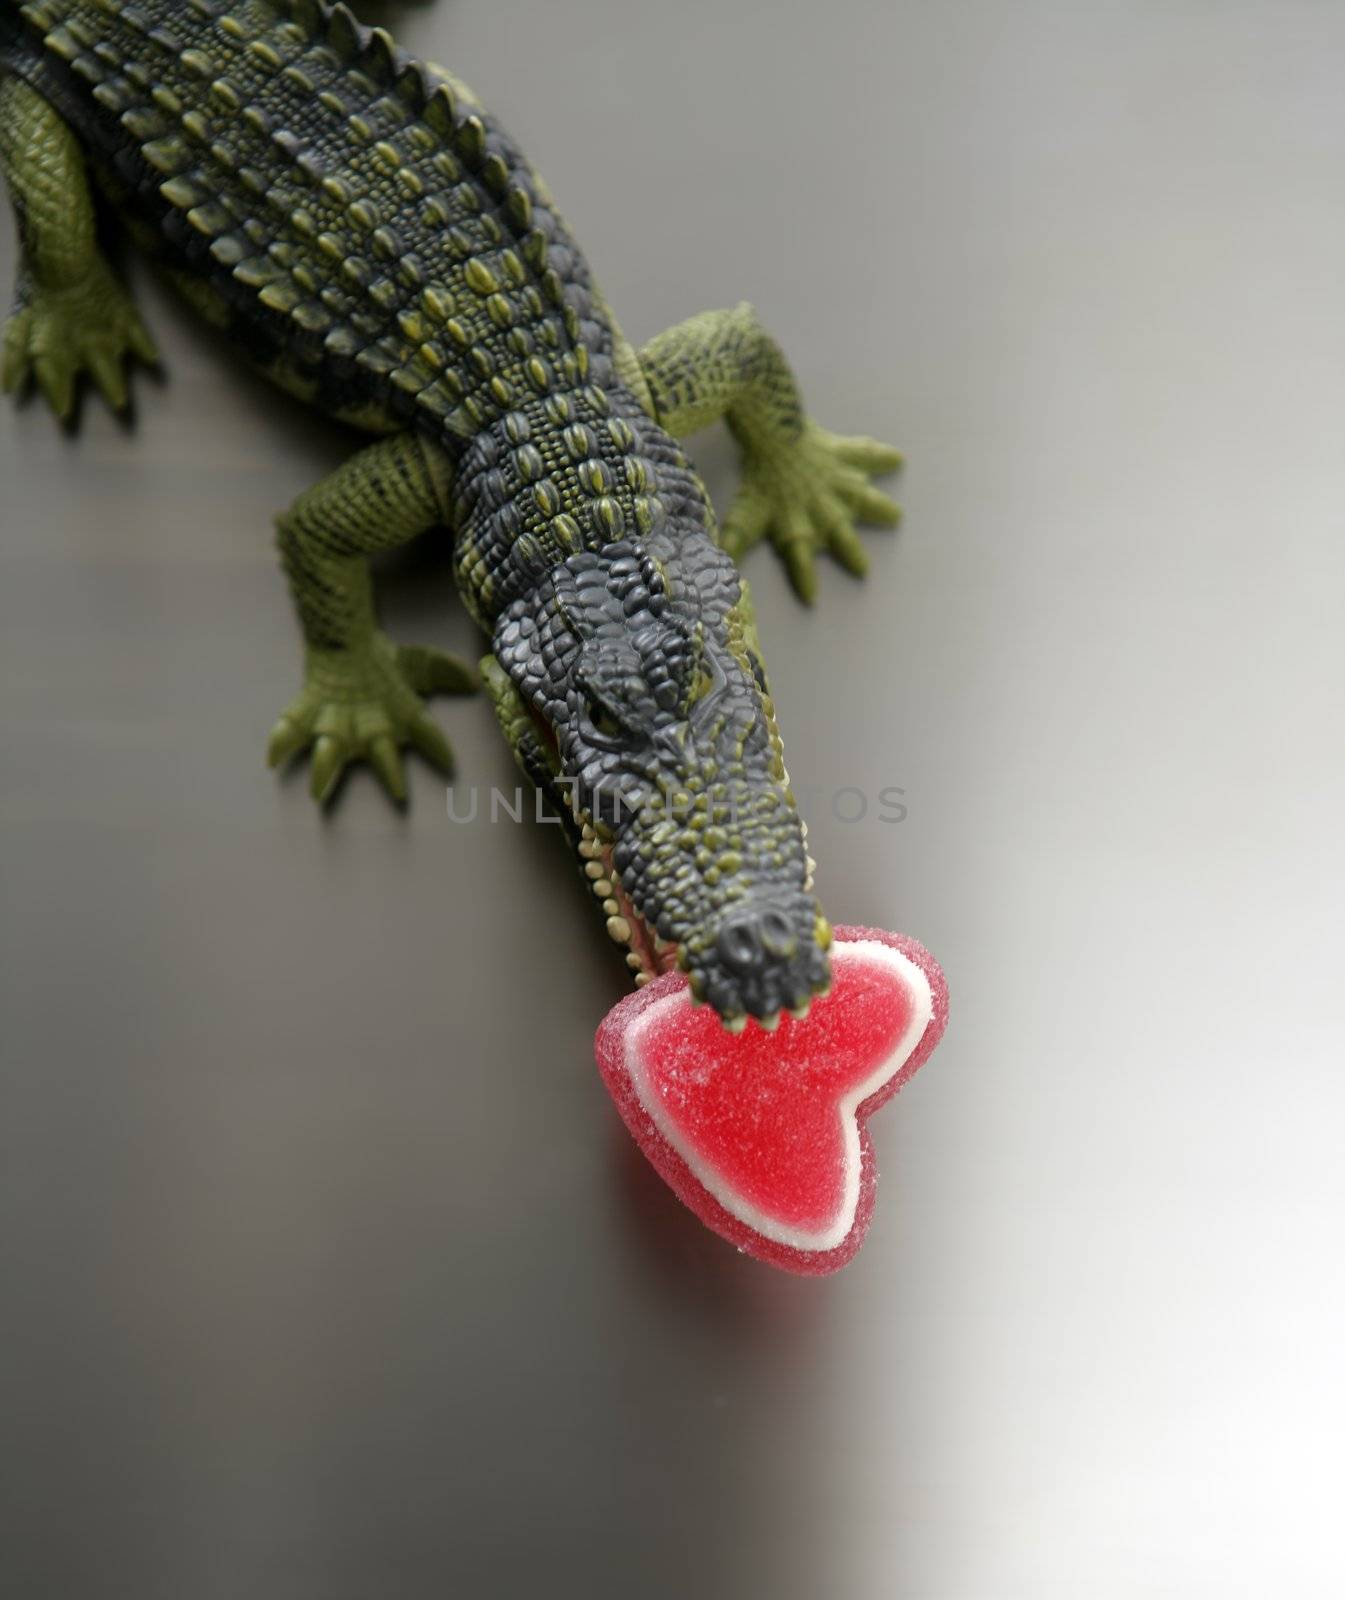 Toy plastic cocodrile, aligator with candy Valentine red heart in its sharped theet jaws metaphor